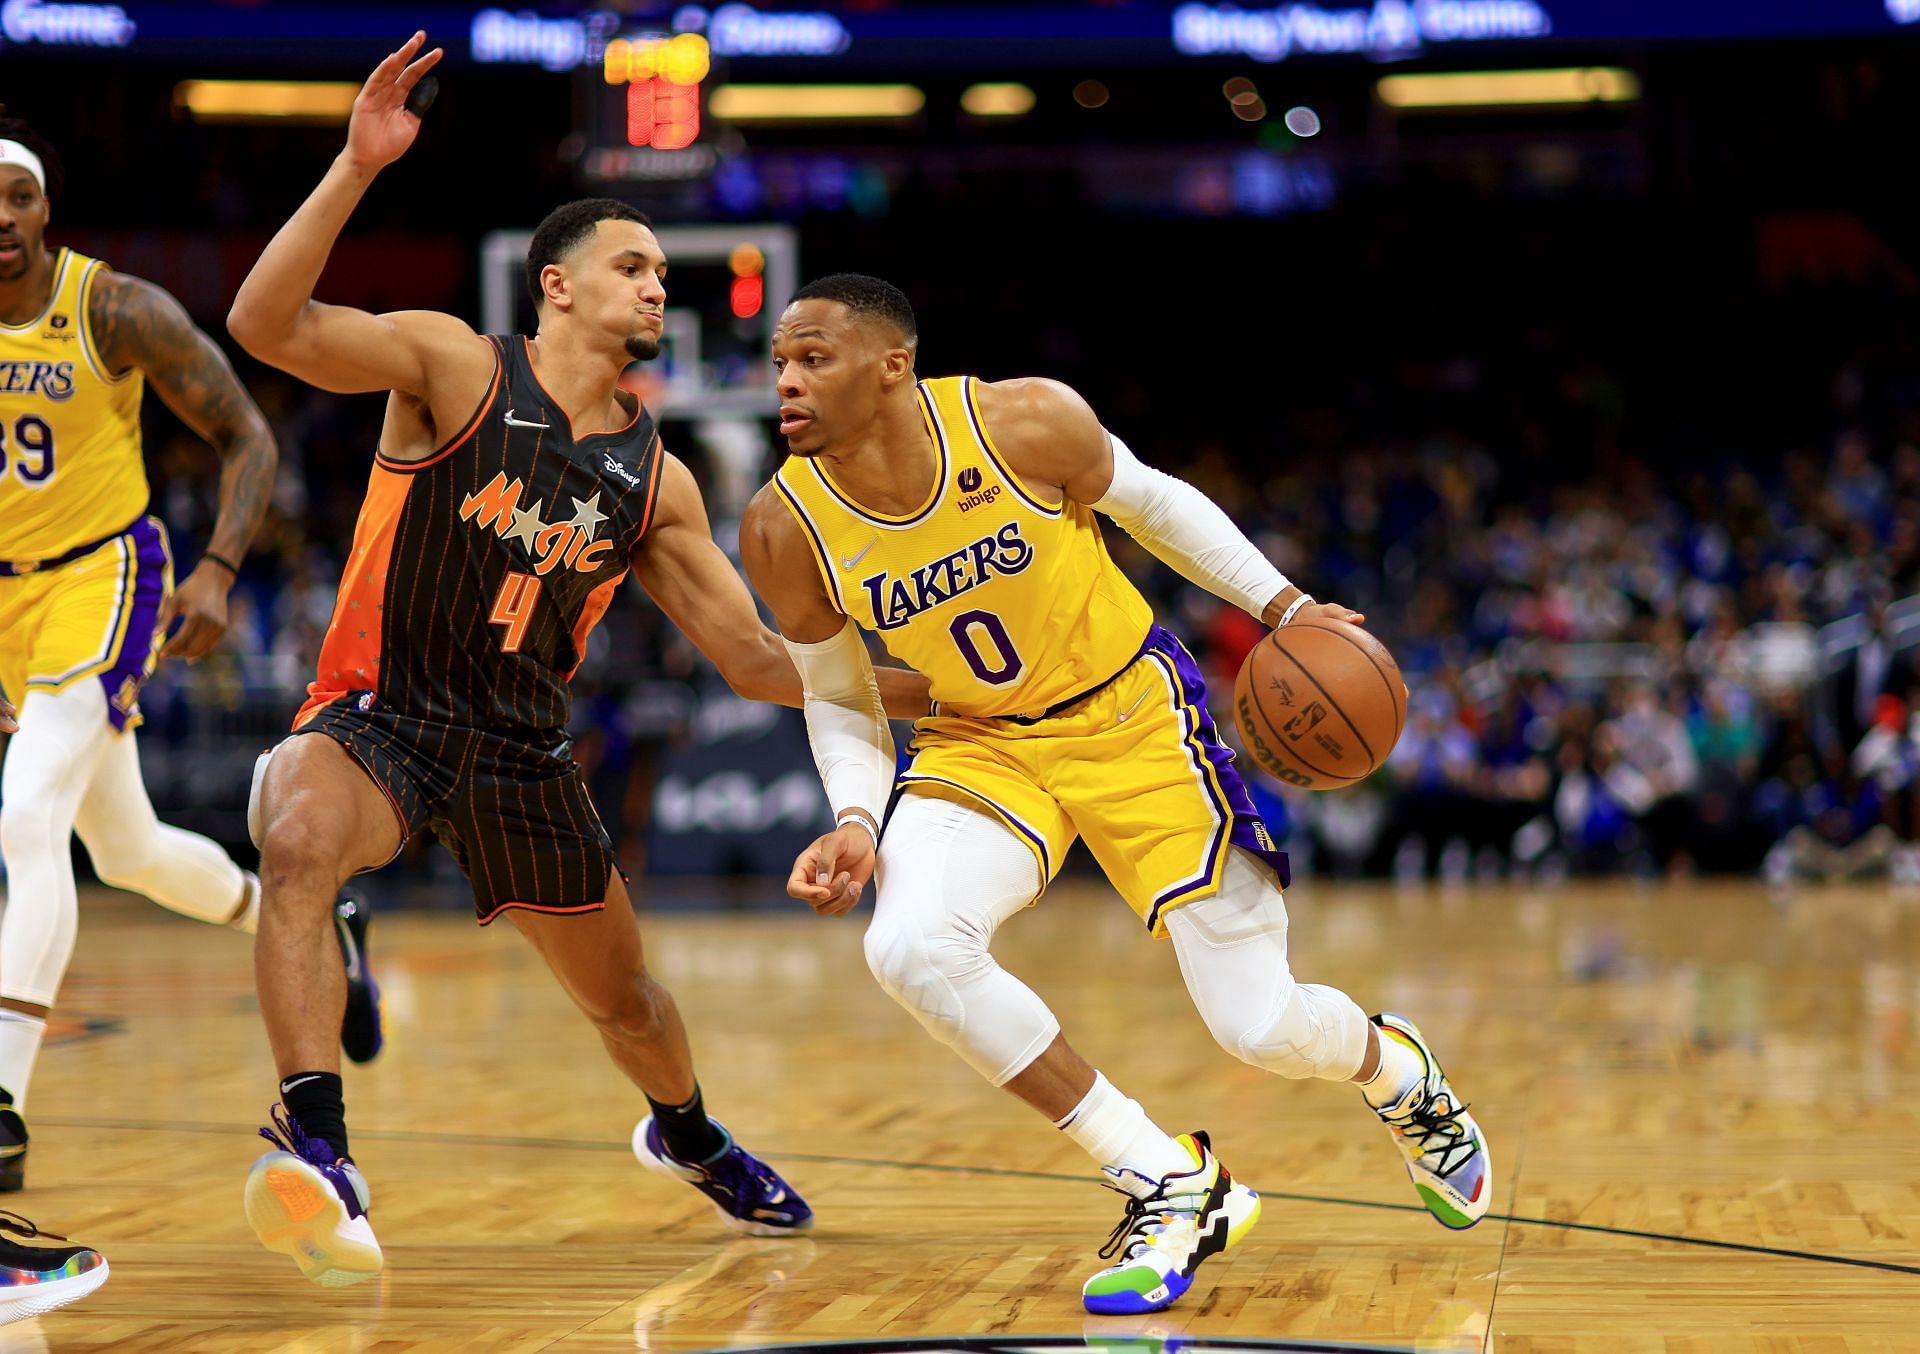 Russell Westbrook #0 of the Los Angeles Lakers drives on Cole Anthony #50 of the Orlando Magic during a game at Amway Center on January 21, 2022 in Orlando, Florida.